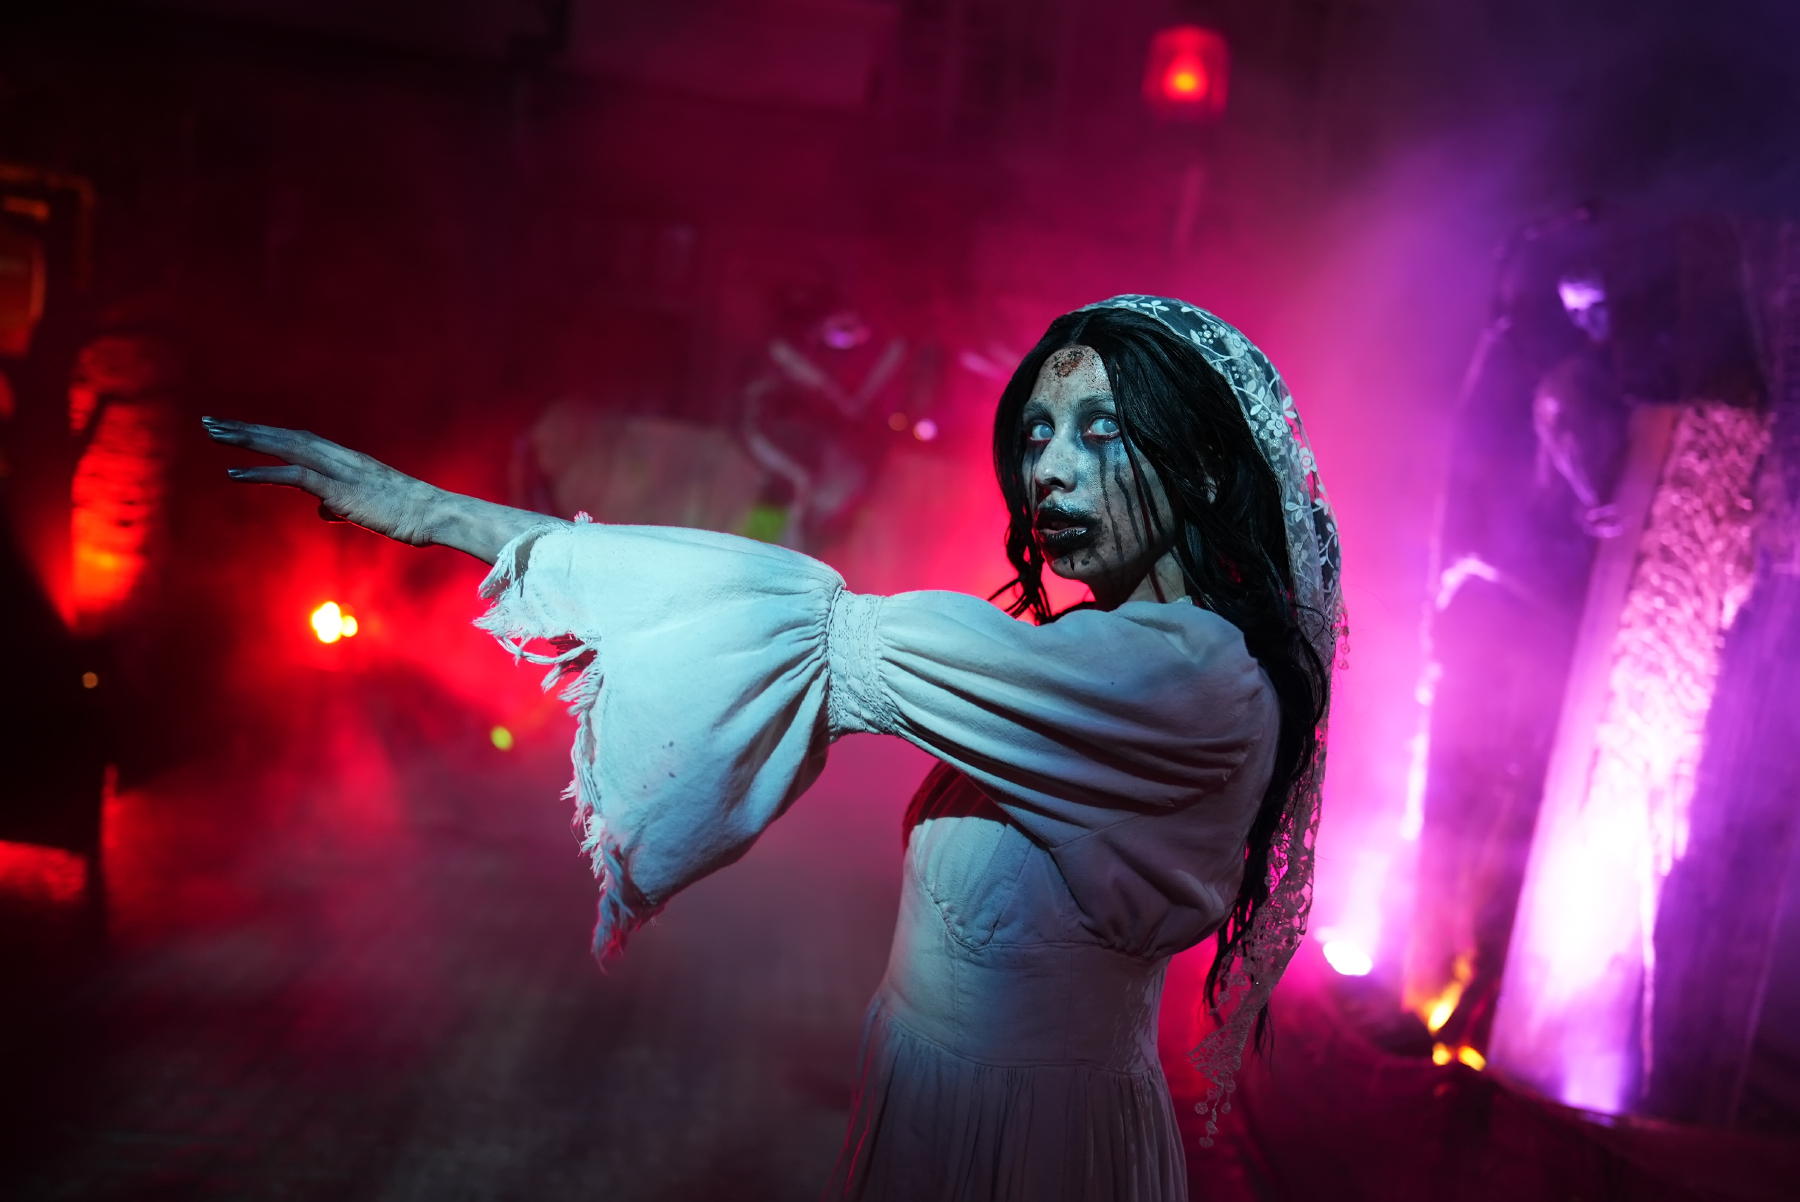 REVIEW: Halloween Horror Nights 2022 at Universal Studios Hollywood